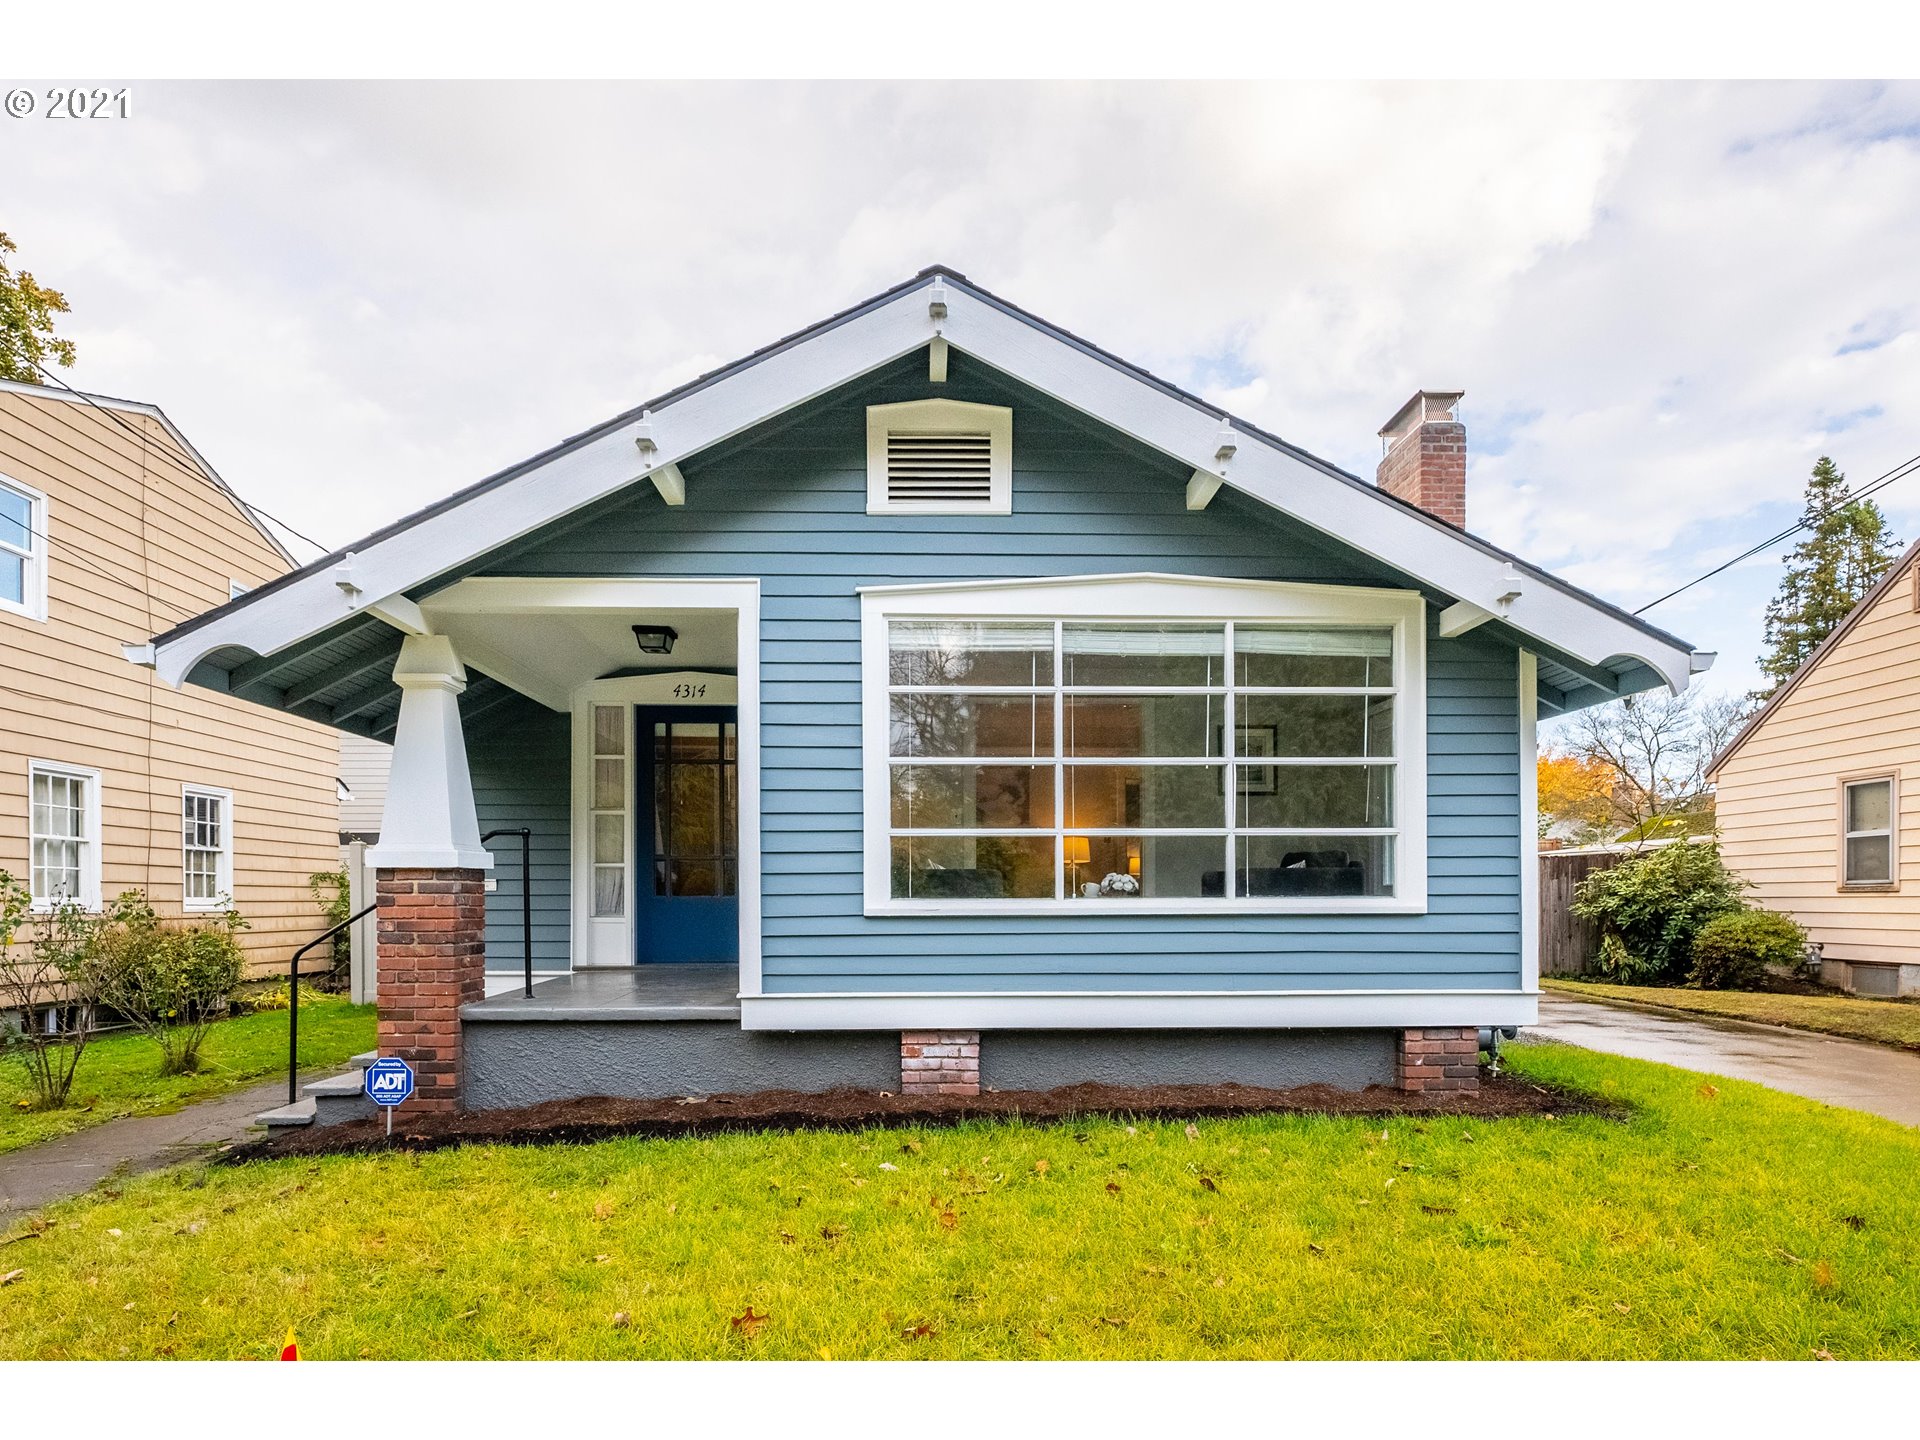 4314 SE 34TH AVE (1 of 28)